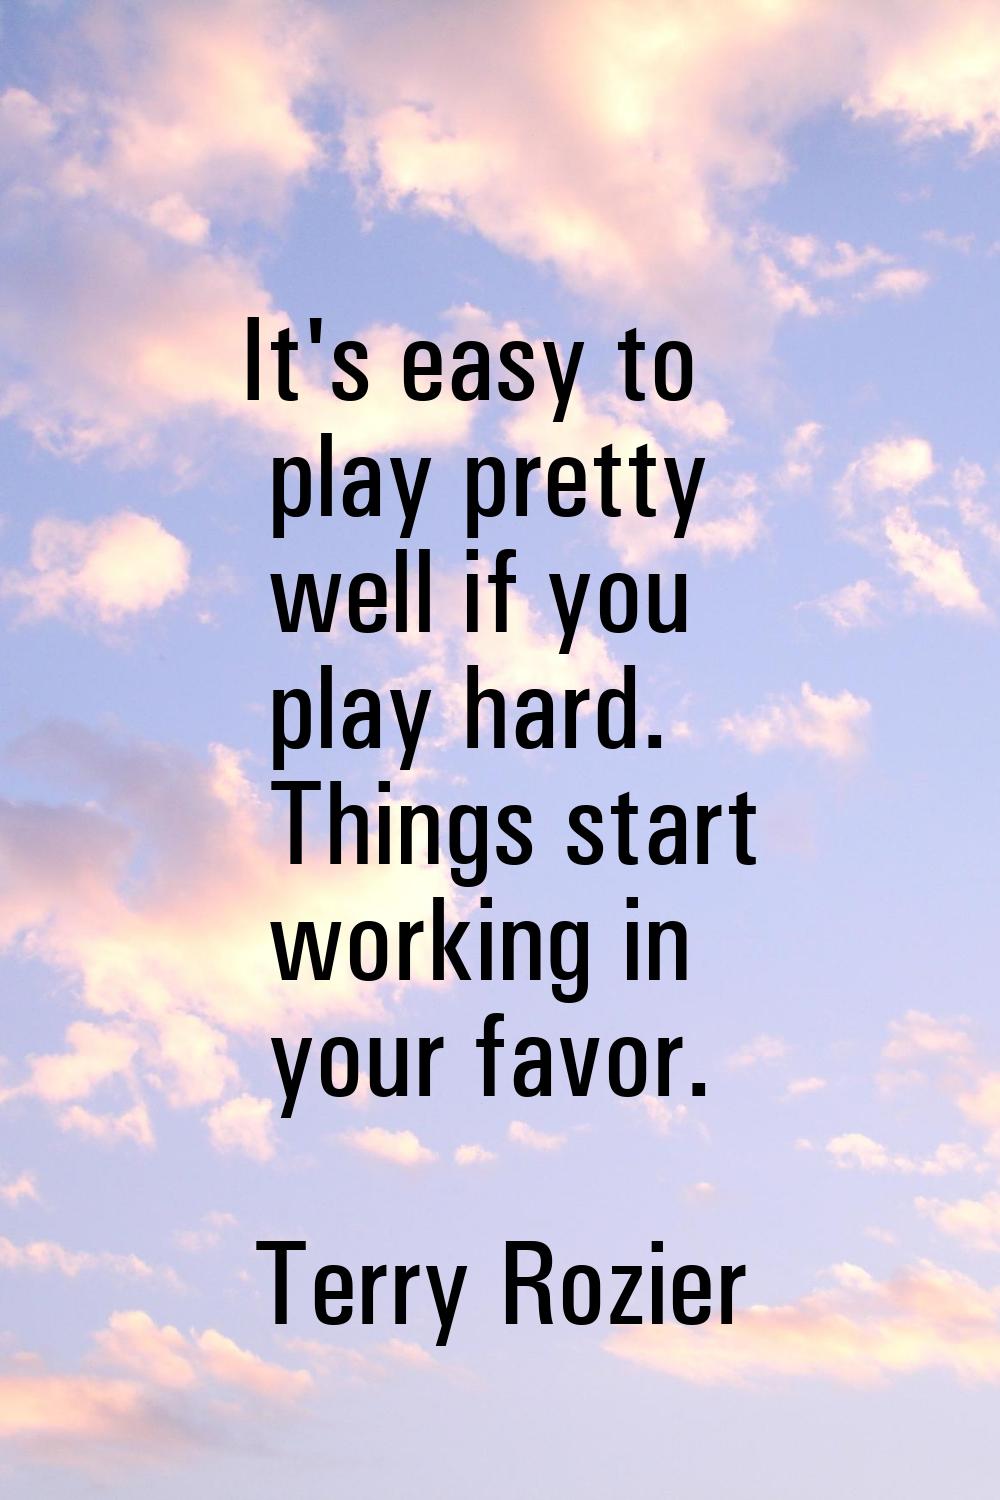 It's easy to play pretty well if you play hard. Things start working in your favor.